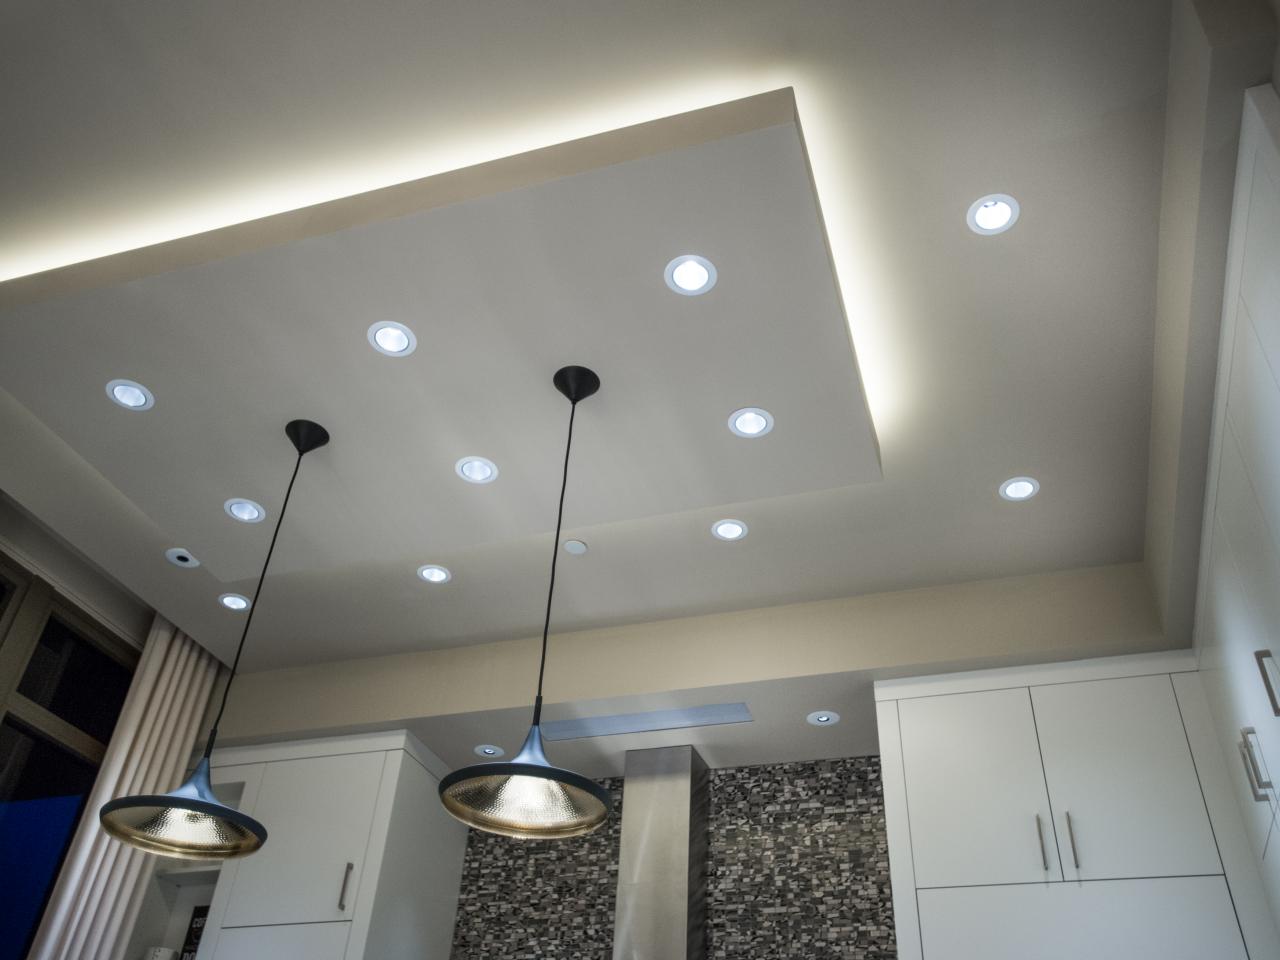 How To Put Recessed Lights In The Ceiling - How To Install Recessed Lighting With Drop Ceiling